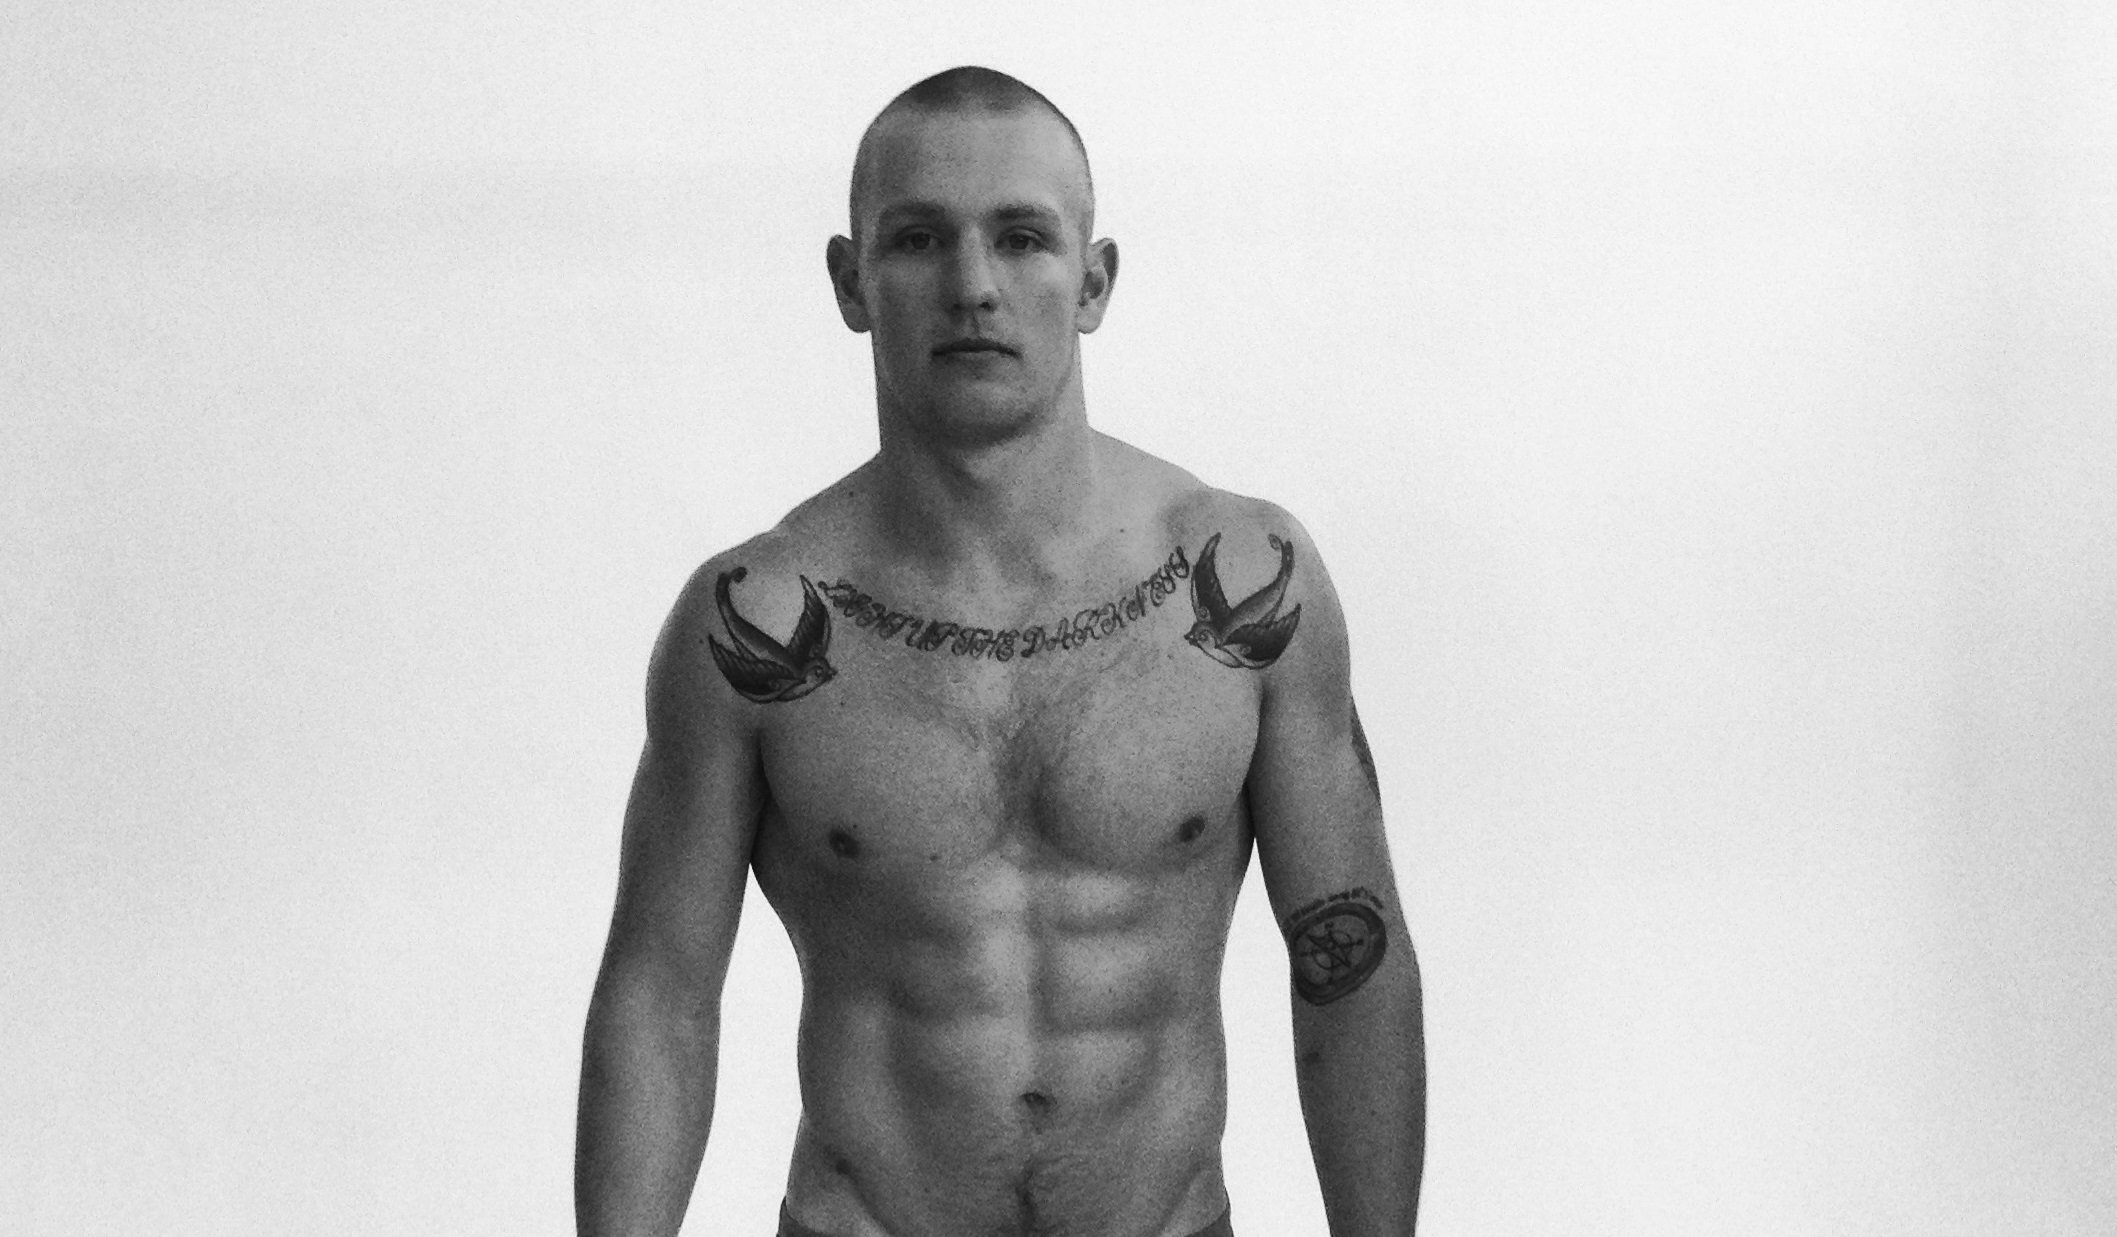 Man Candy Gold: Matt Rodwell from Nevs in his #MyCalvins - Attitude